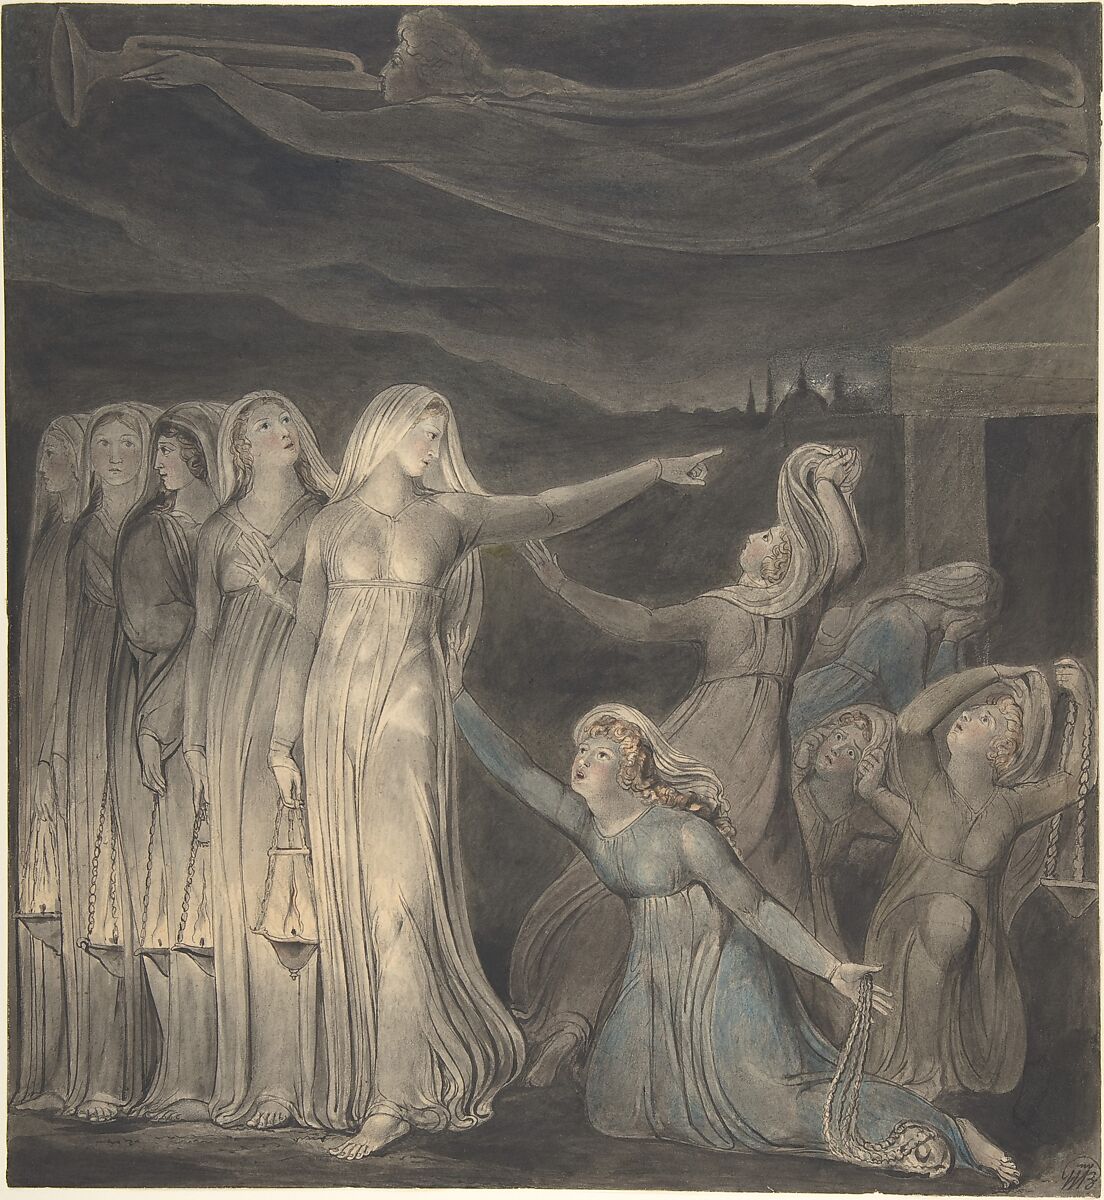 The Parable of the Wise and Foolish Virgins, William Blake, Watercolor, pen and black ink, brush and wash, over graphite